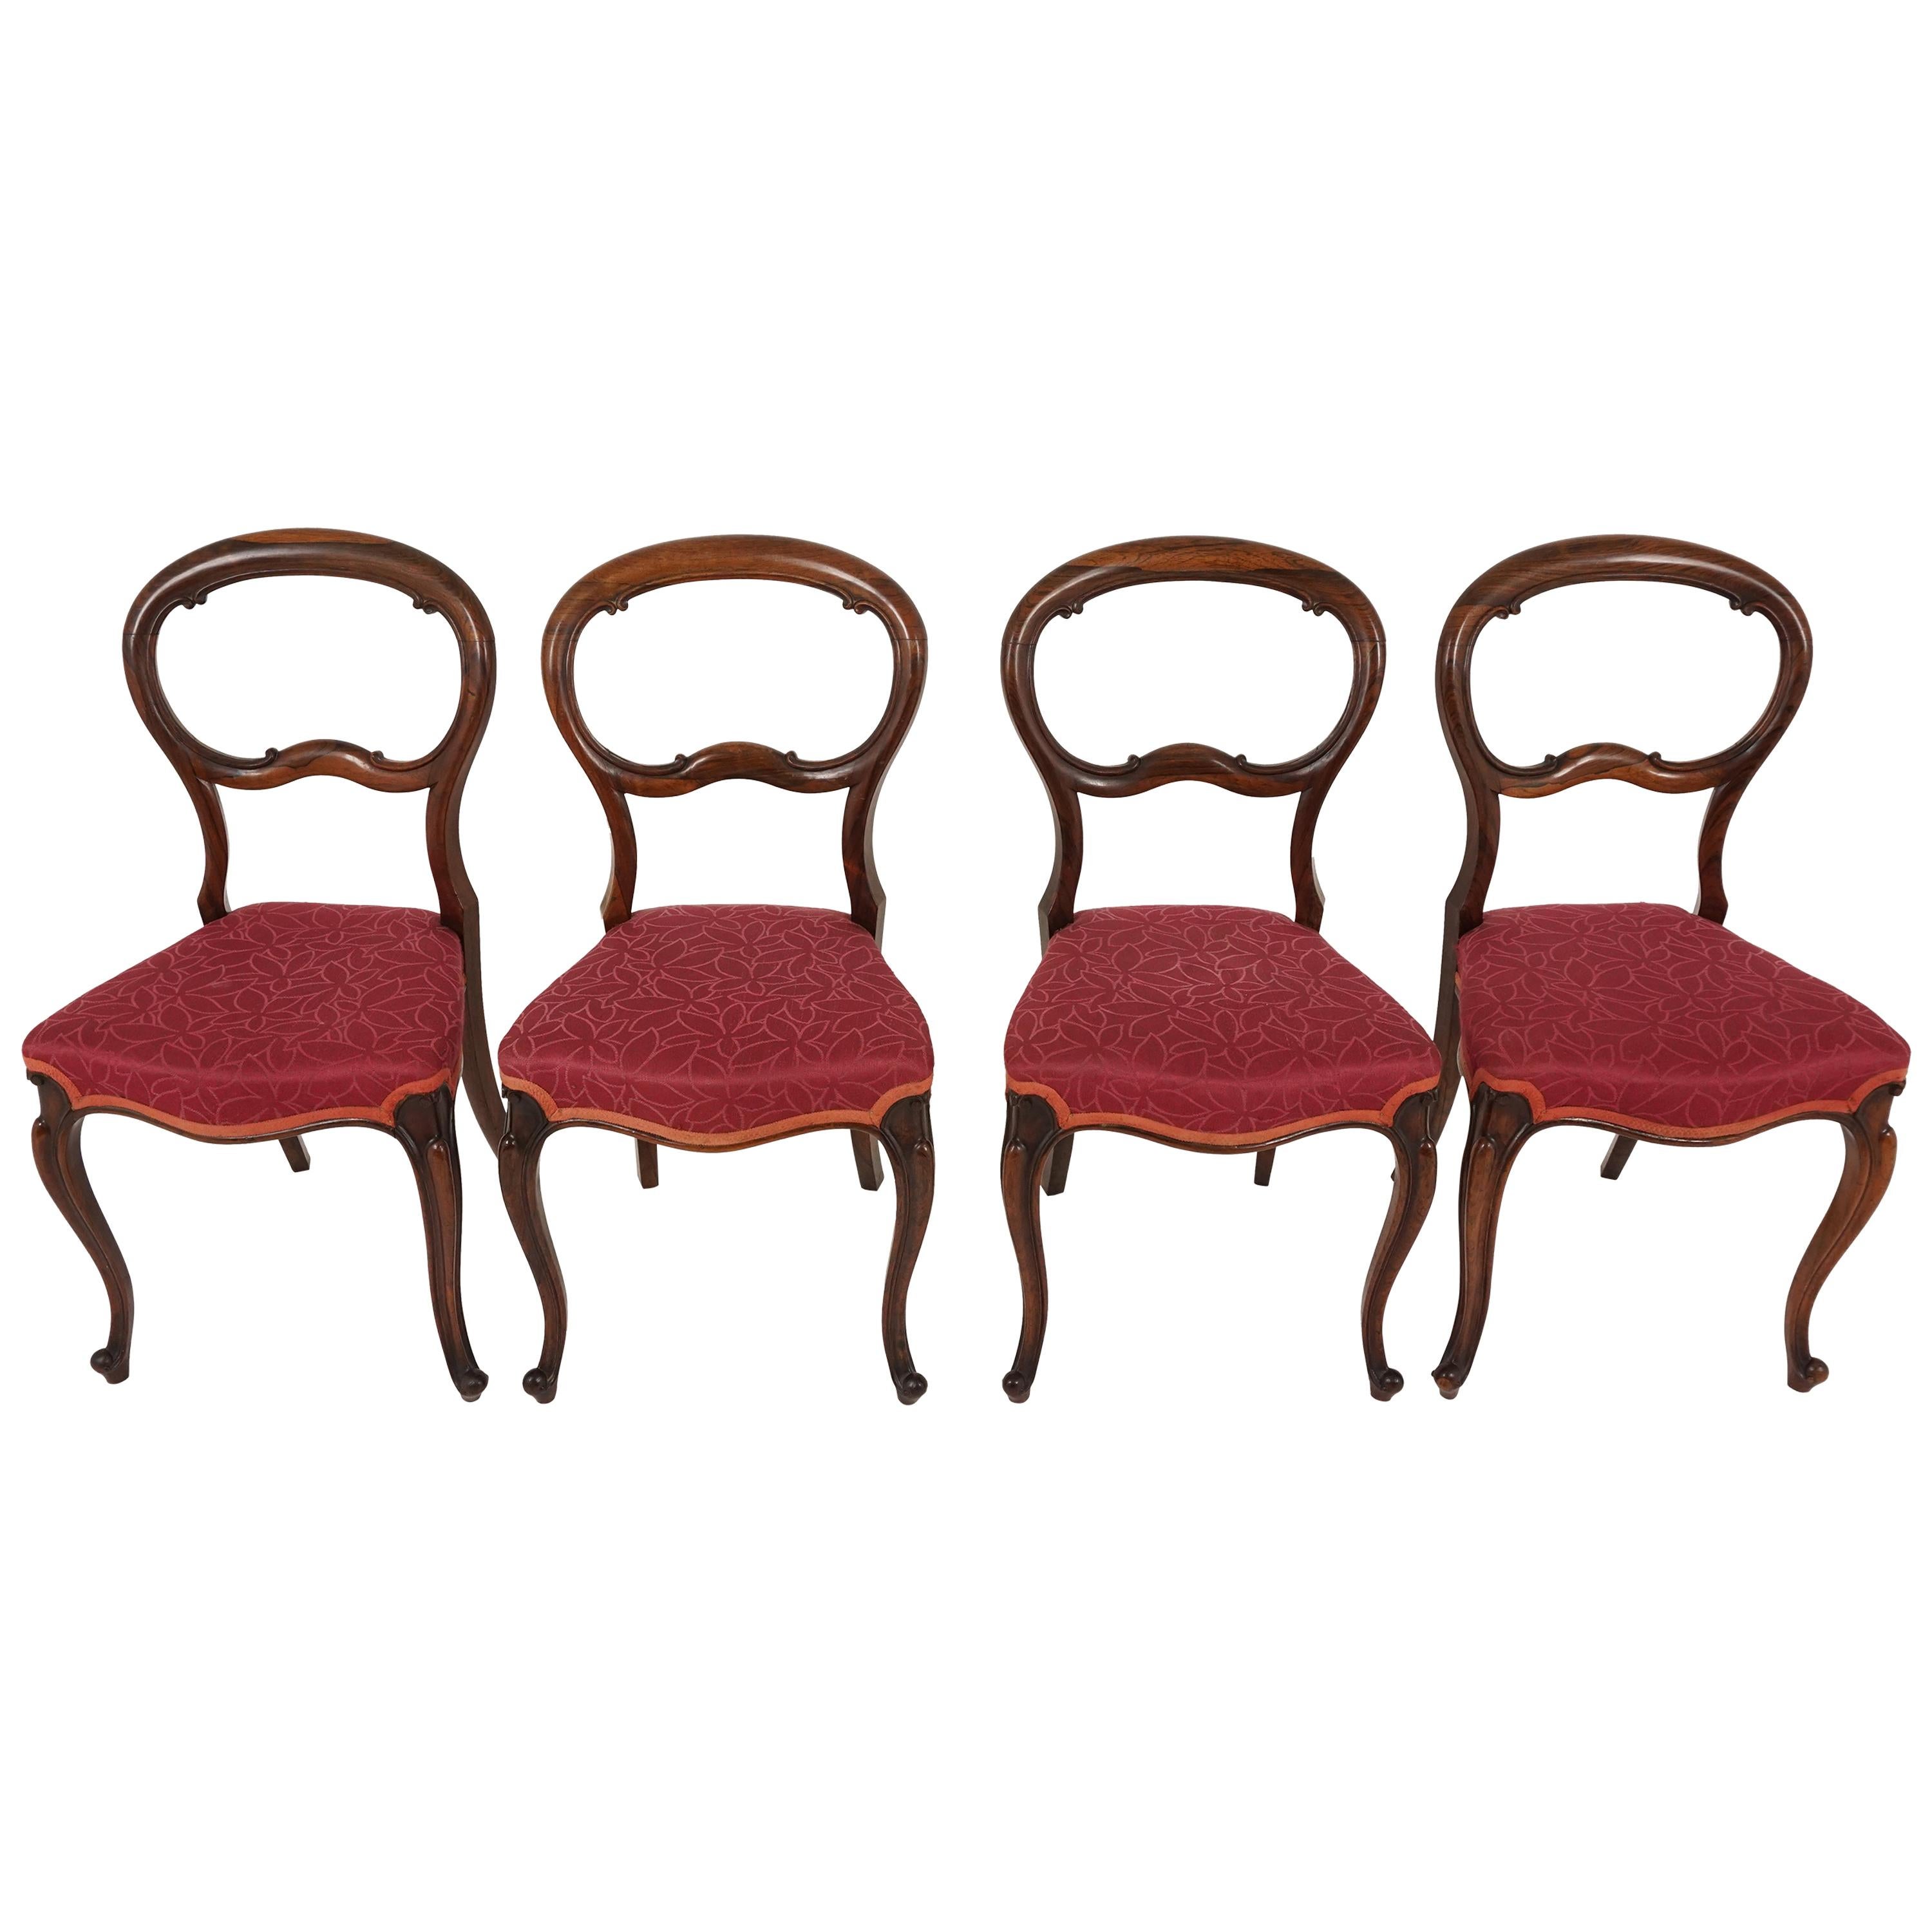 4 Antique Victorian Rosewood Balloon Back Dining Chairs, Scotland 1870, B2161